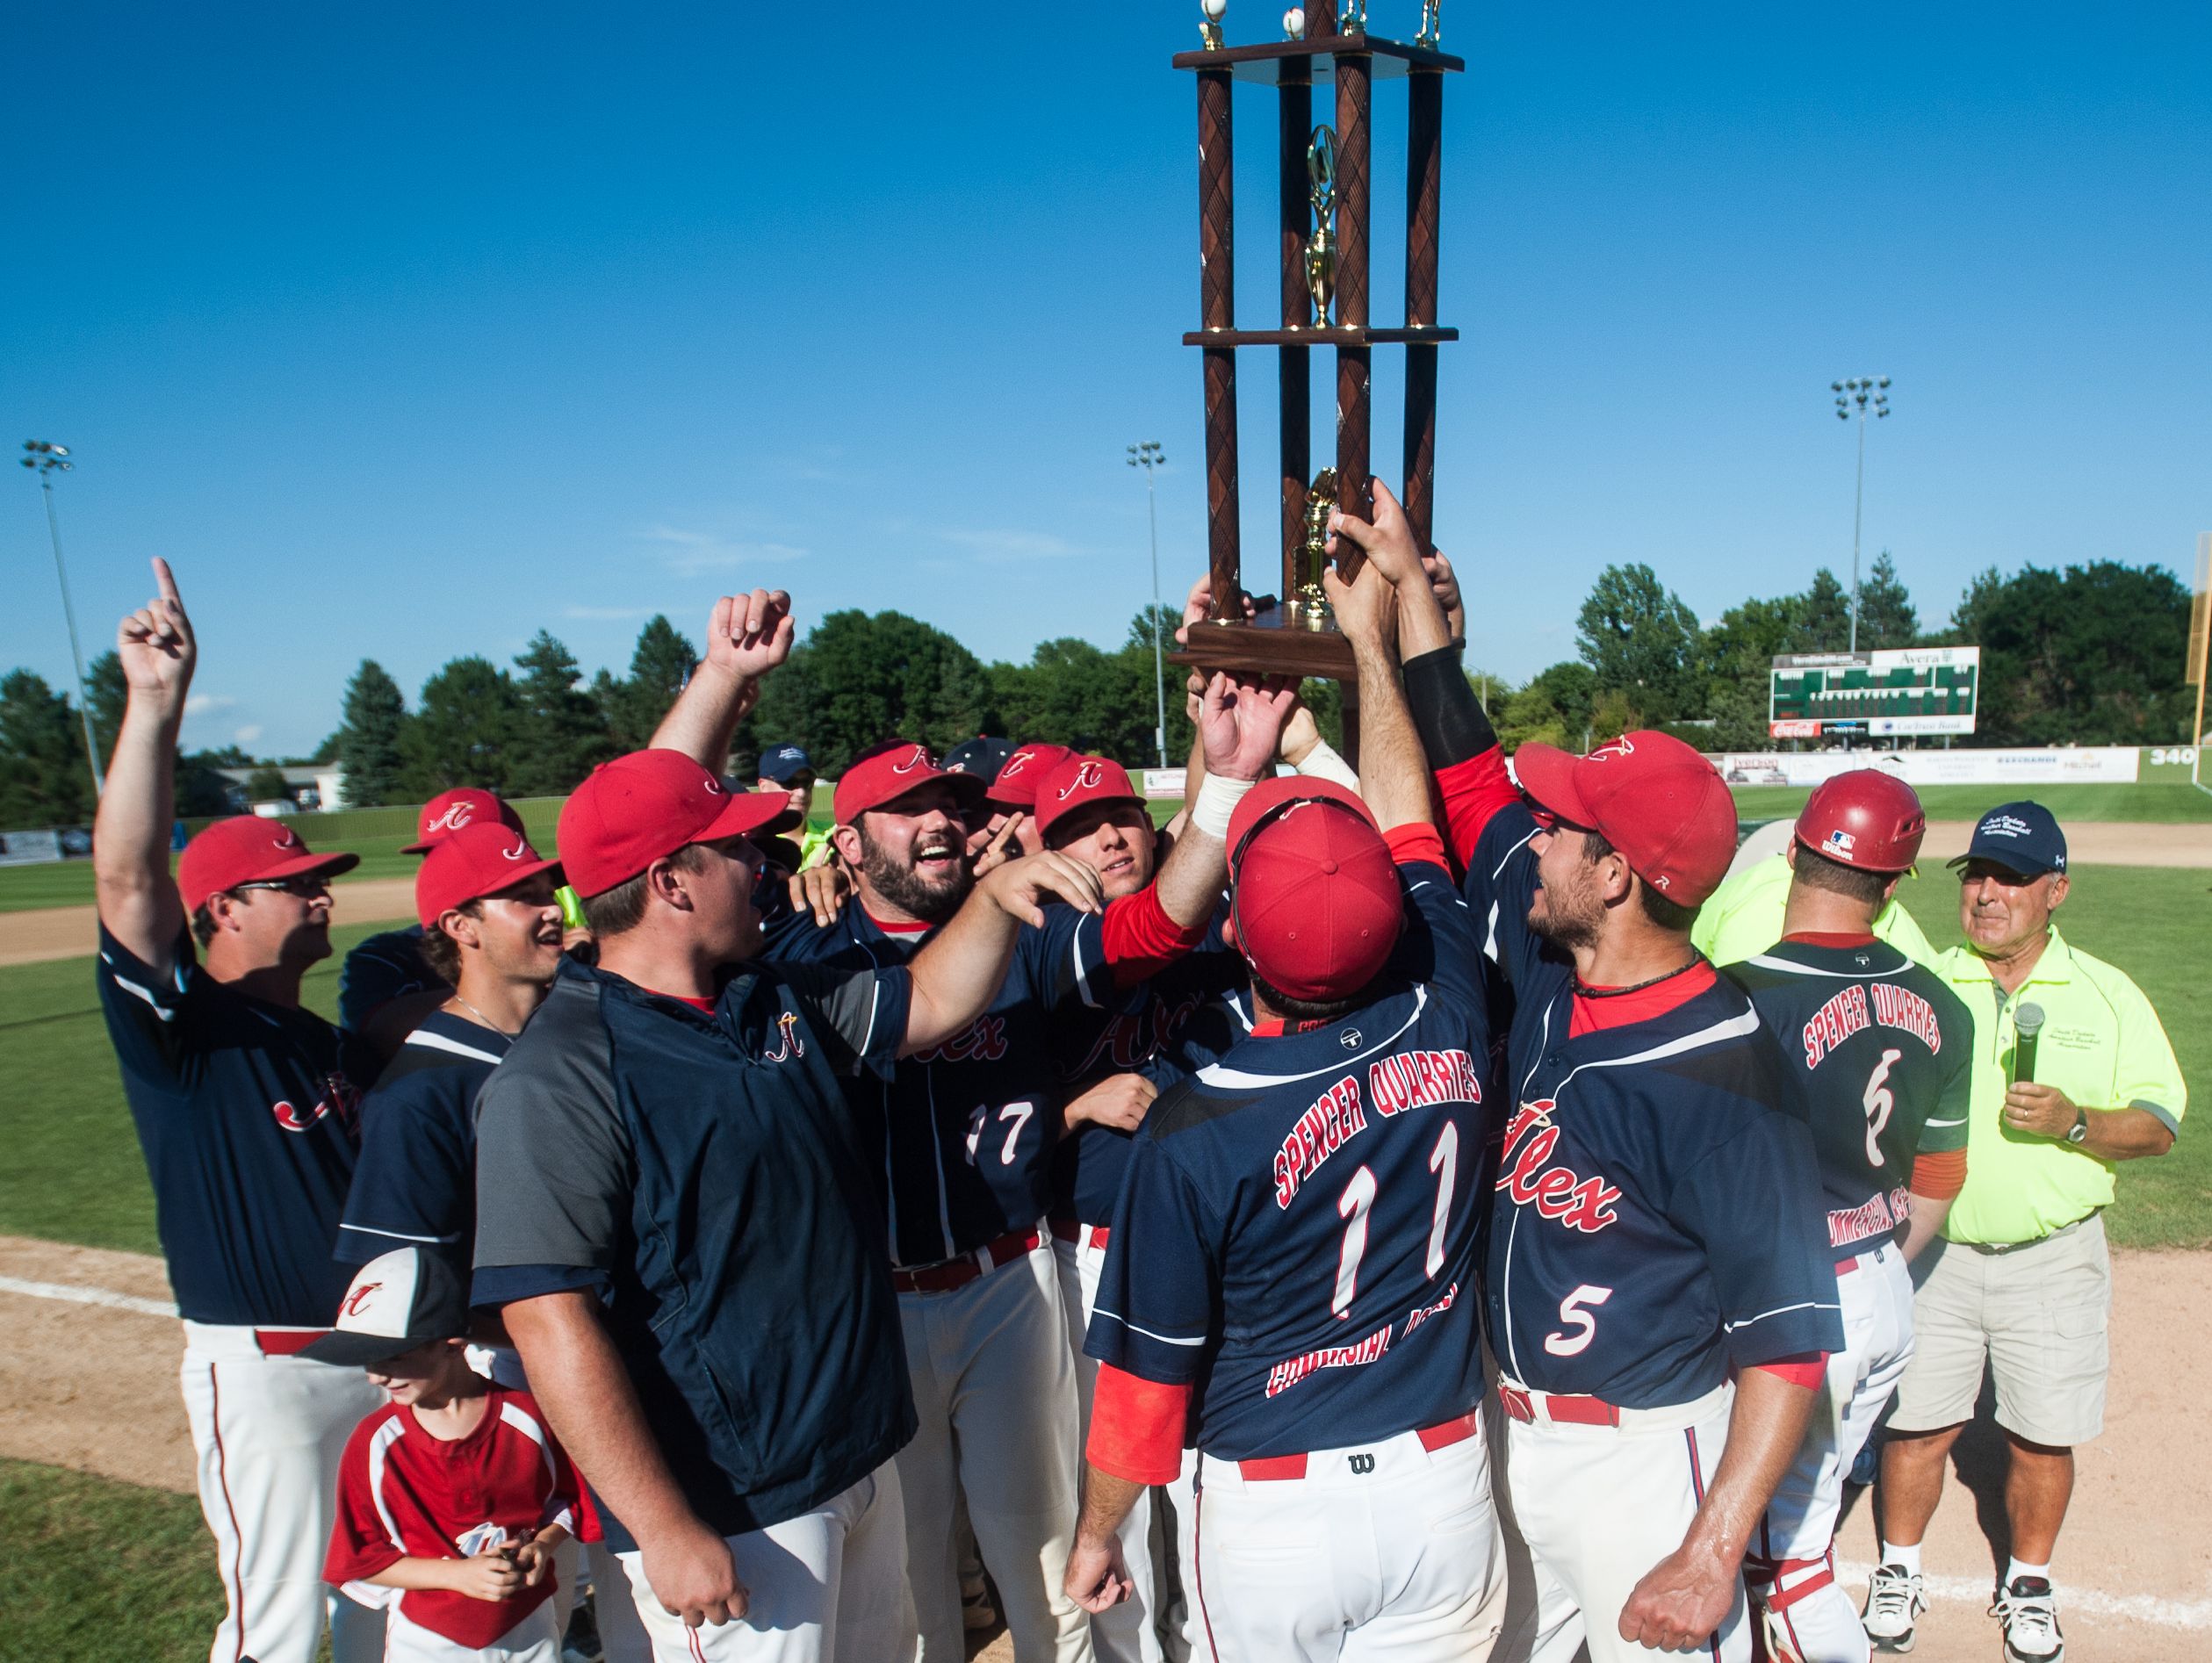 Team members of the Alexandria Angels hold the trophy at the South Dakota Class B Amateur Baseball Championship at Caldwell Park, Mitchell, S.D. The Alexndria Angels wins 7 - 1 over the Garretson BlueJays.